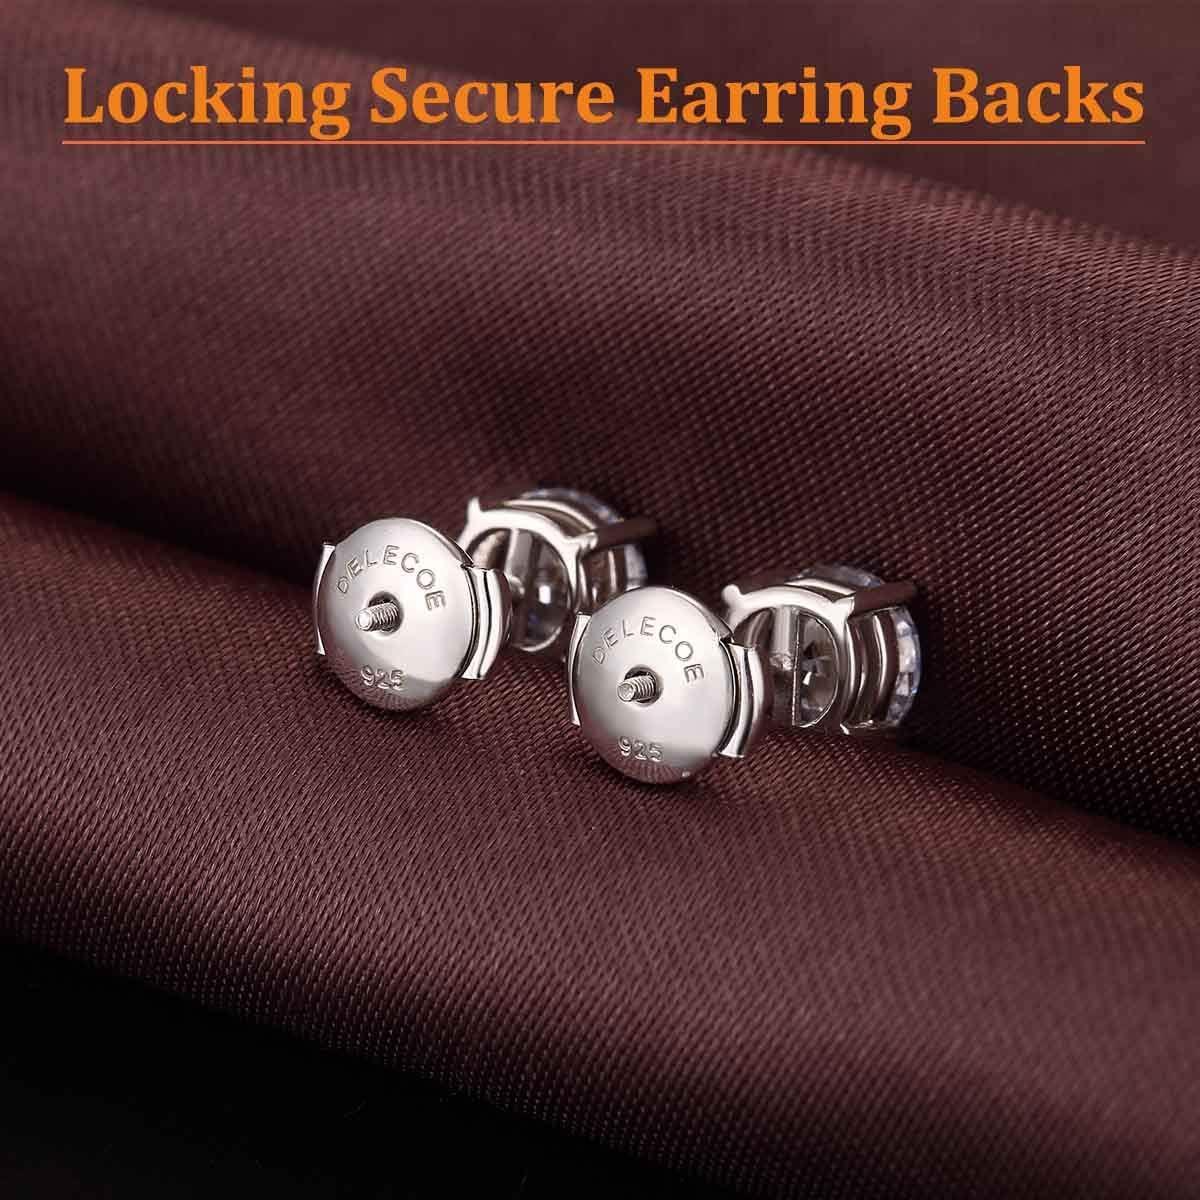 DELECOE 925 Sterling Silver Secure Screw on Earring Backs Replacement for  Diamond Earring Studs, 18K Gold Hypoallergenic Screwbacks Locking for